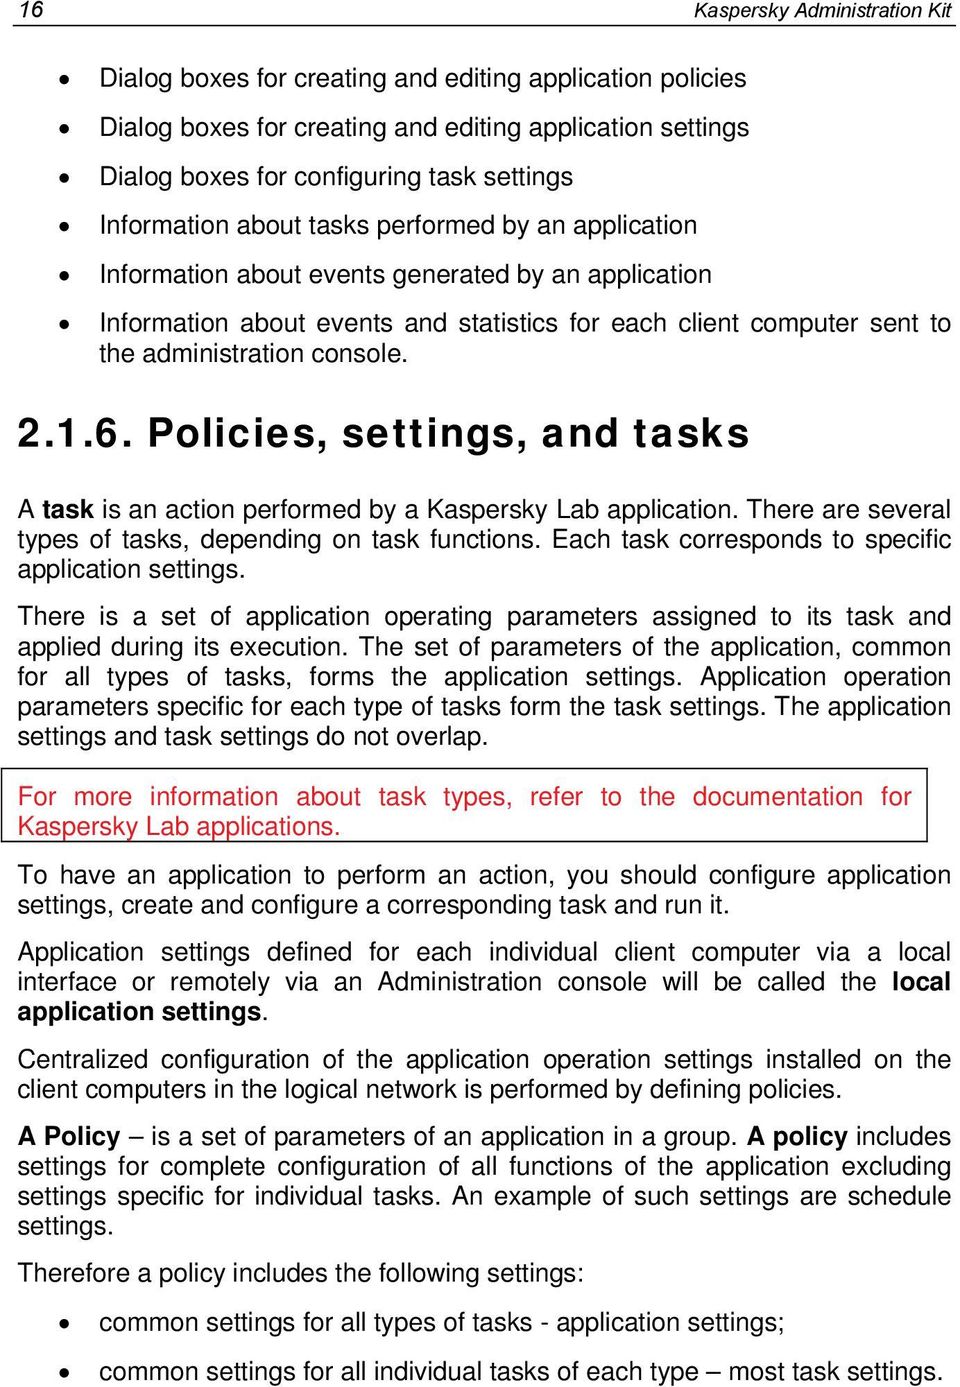 console. 2.1.6. Policies, settings, and tasks A task is an action performed by a Kaspersky Lab application. There are several types of tasks, depending on task functions.